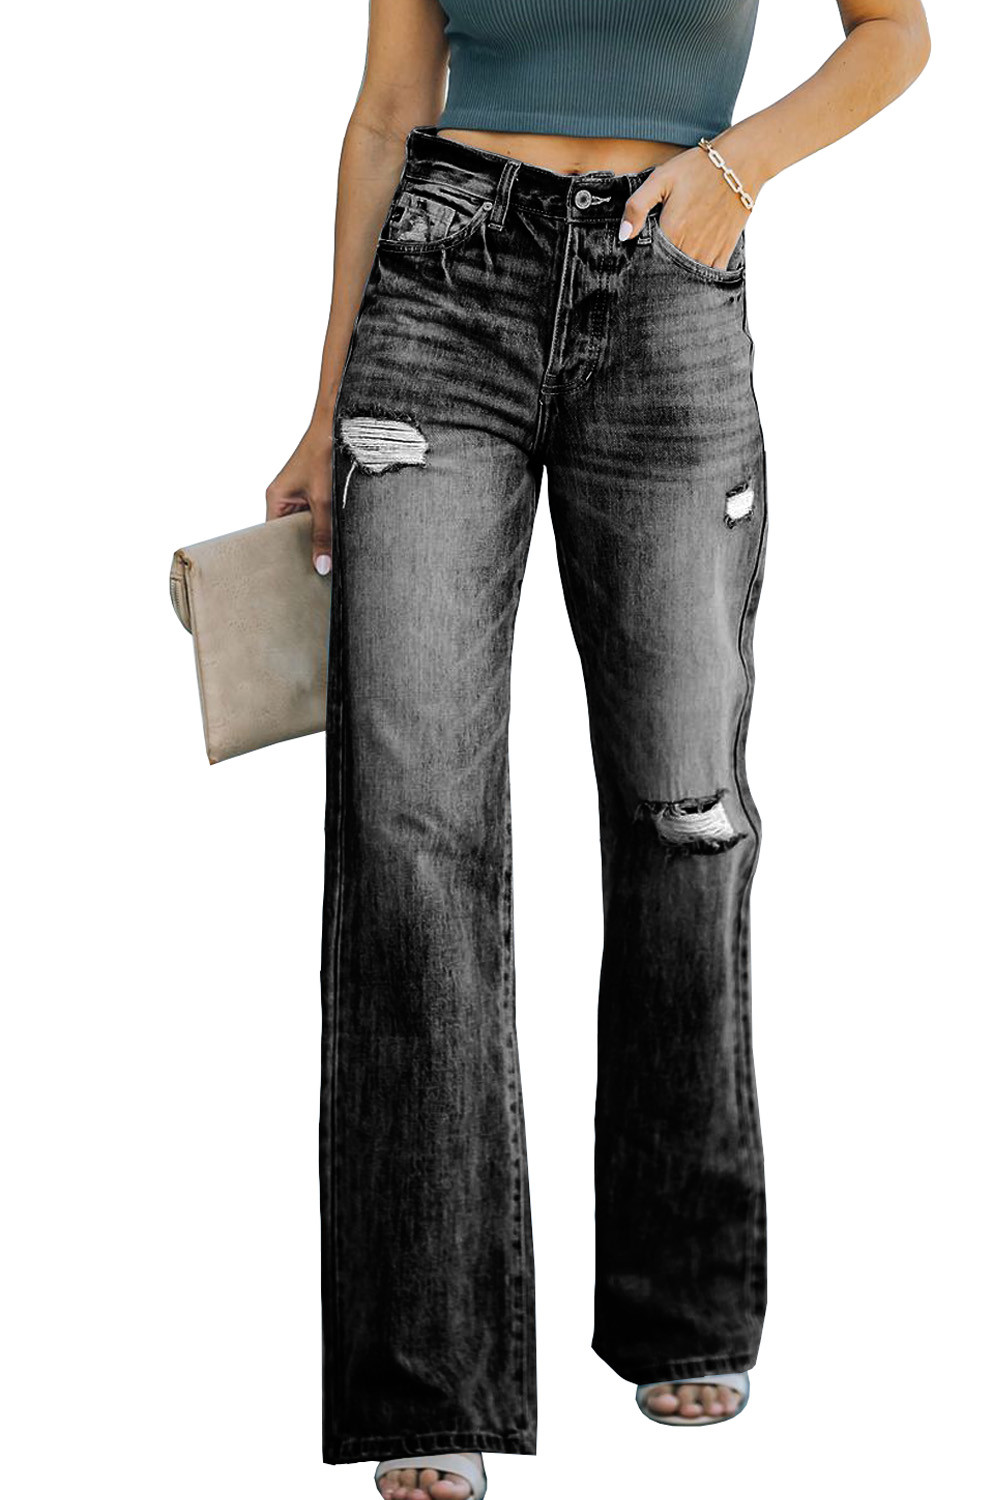 US$ 31.34 - Black High Rise Washed Distressed Flare Jeans - www.unishe.com